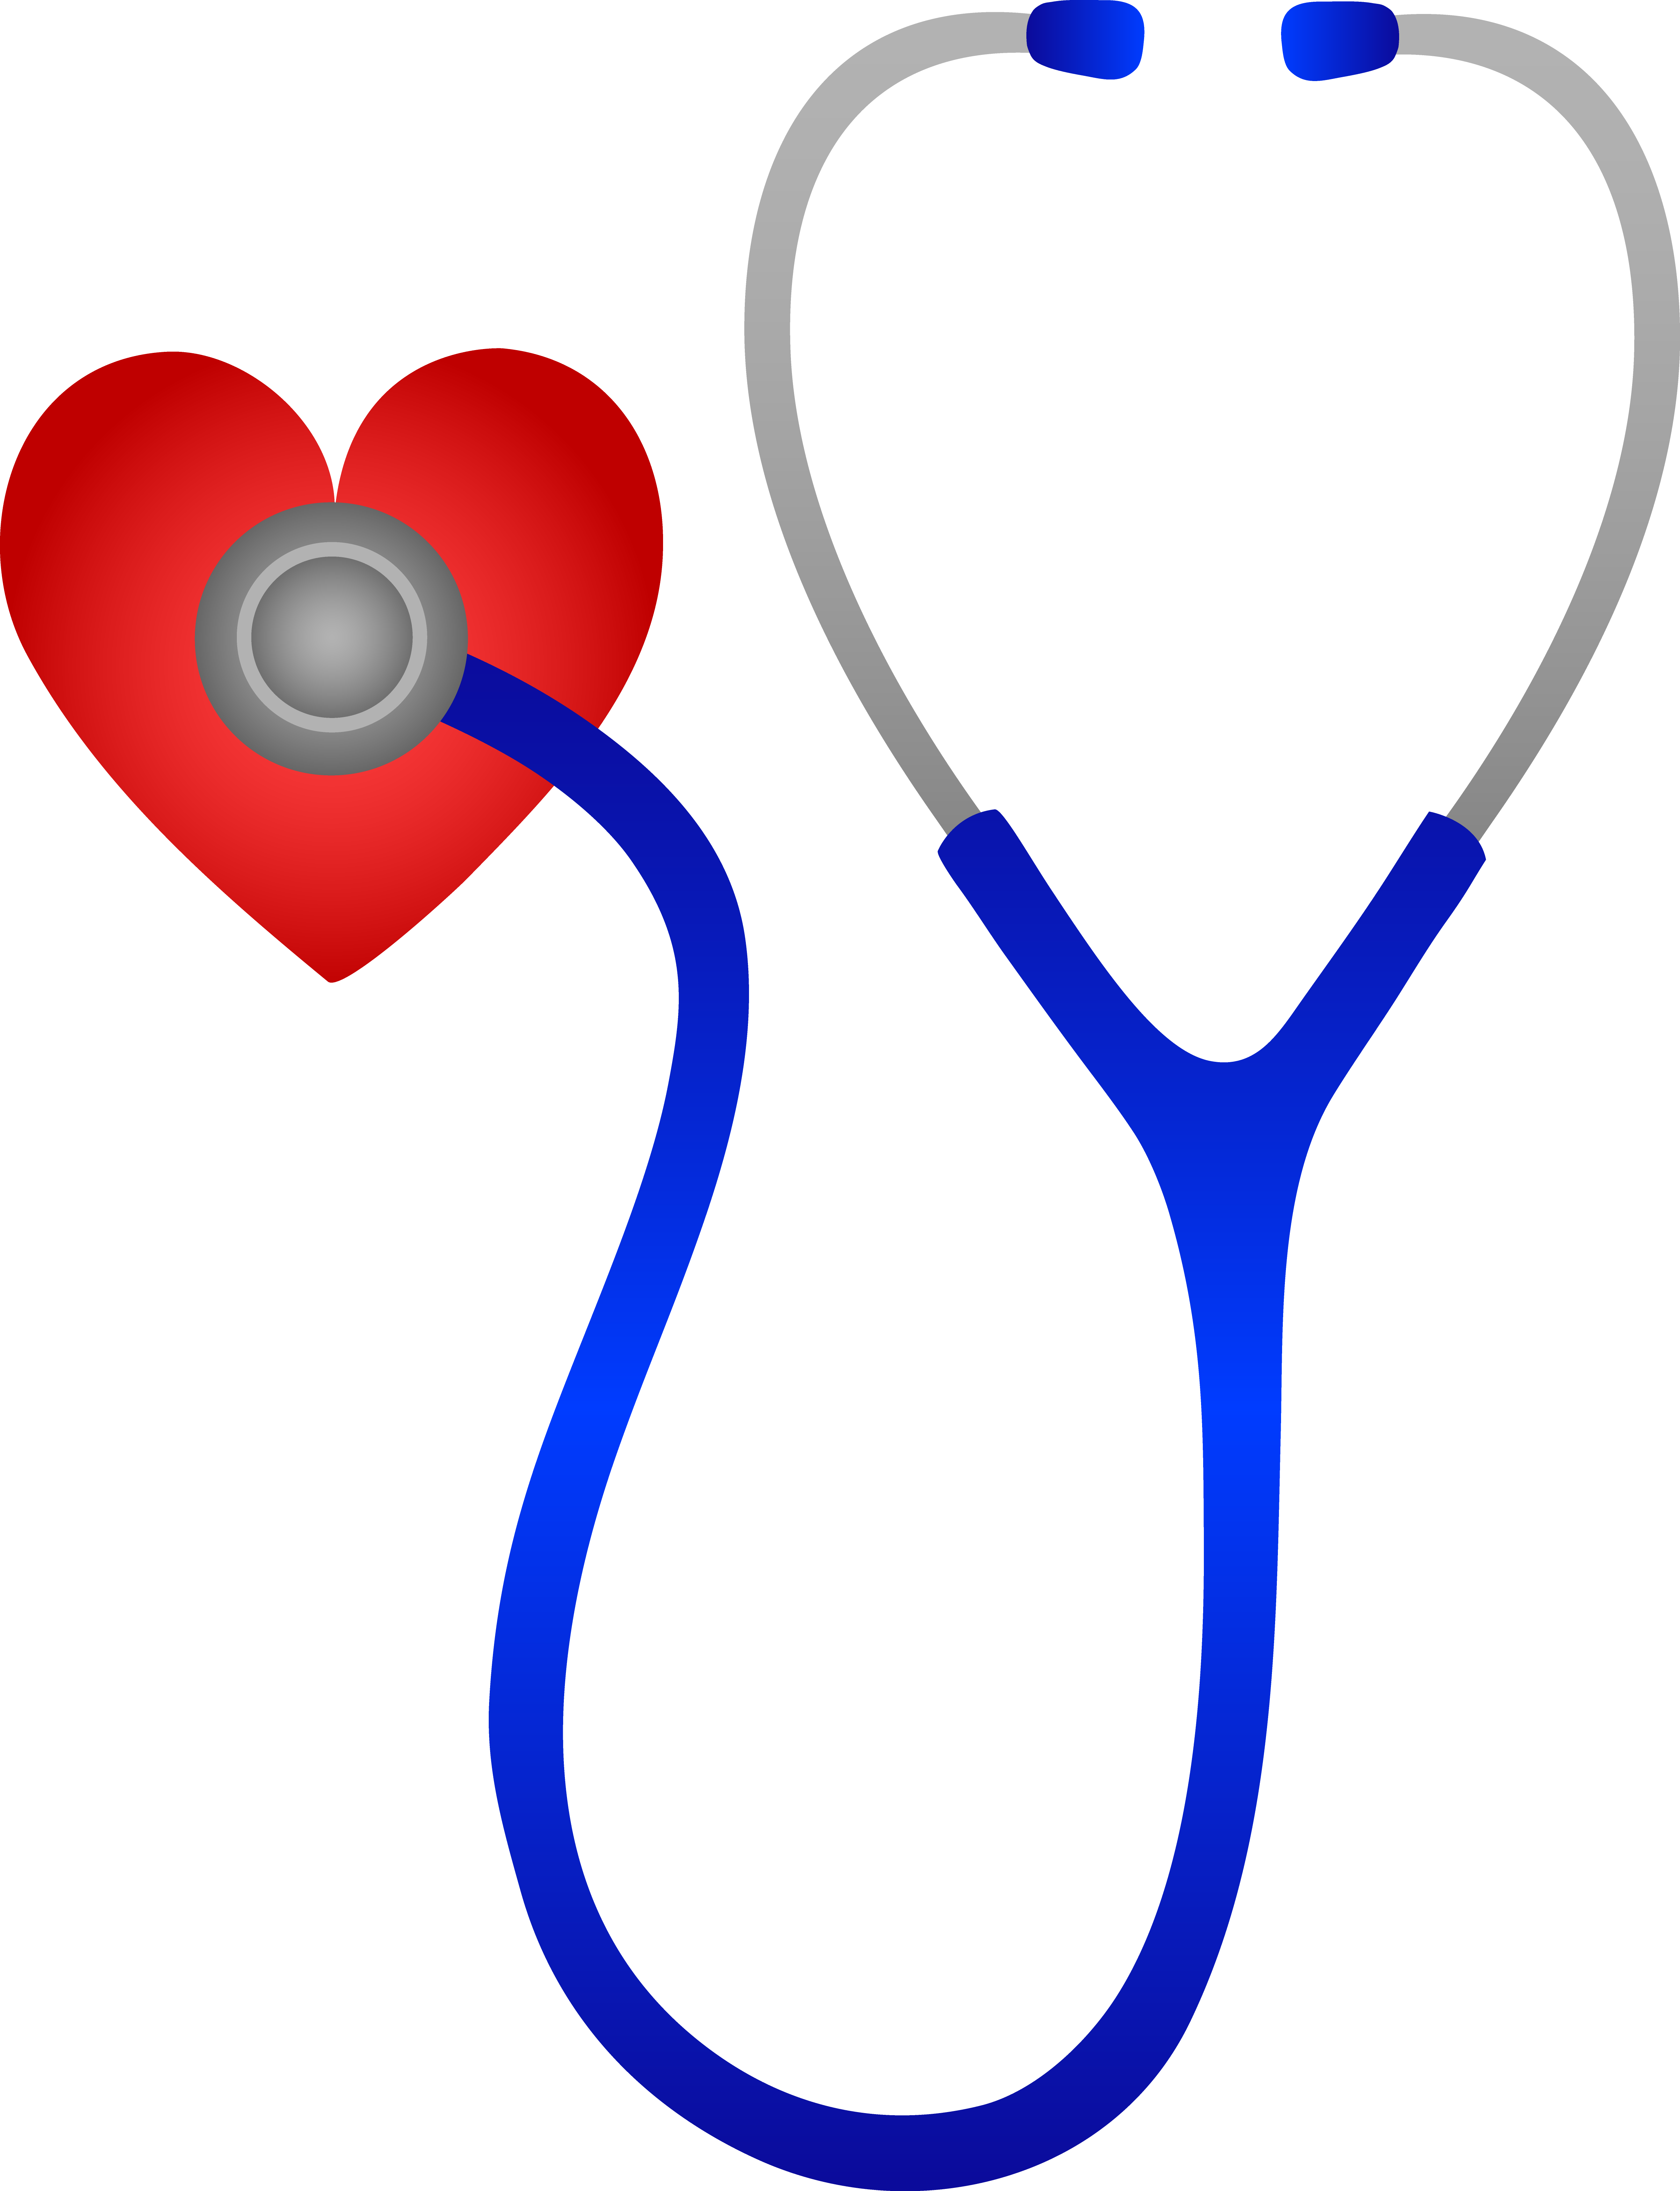 Blue stethoscope and.